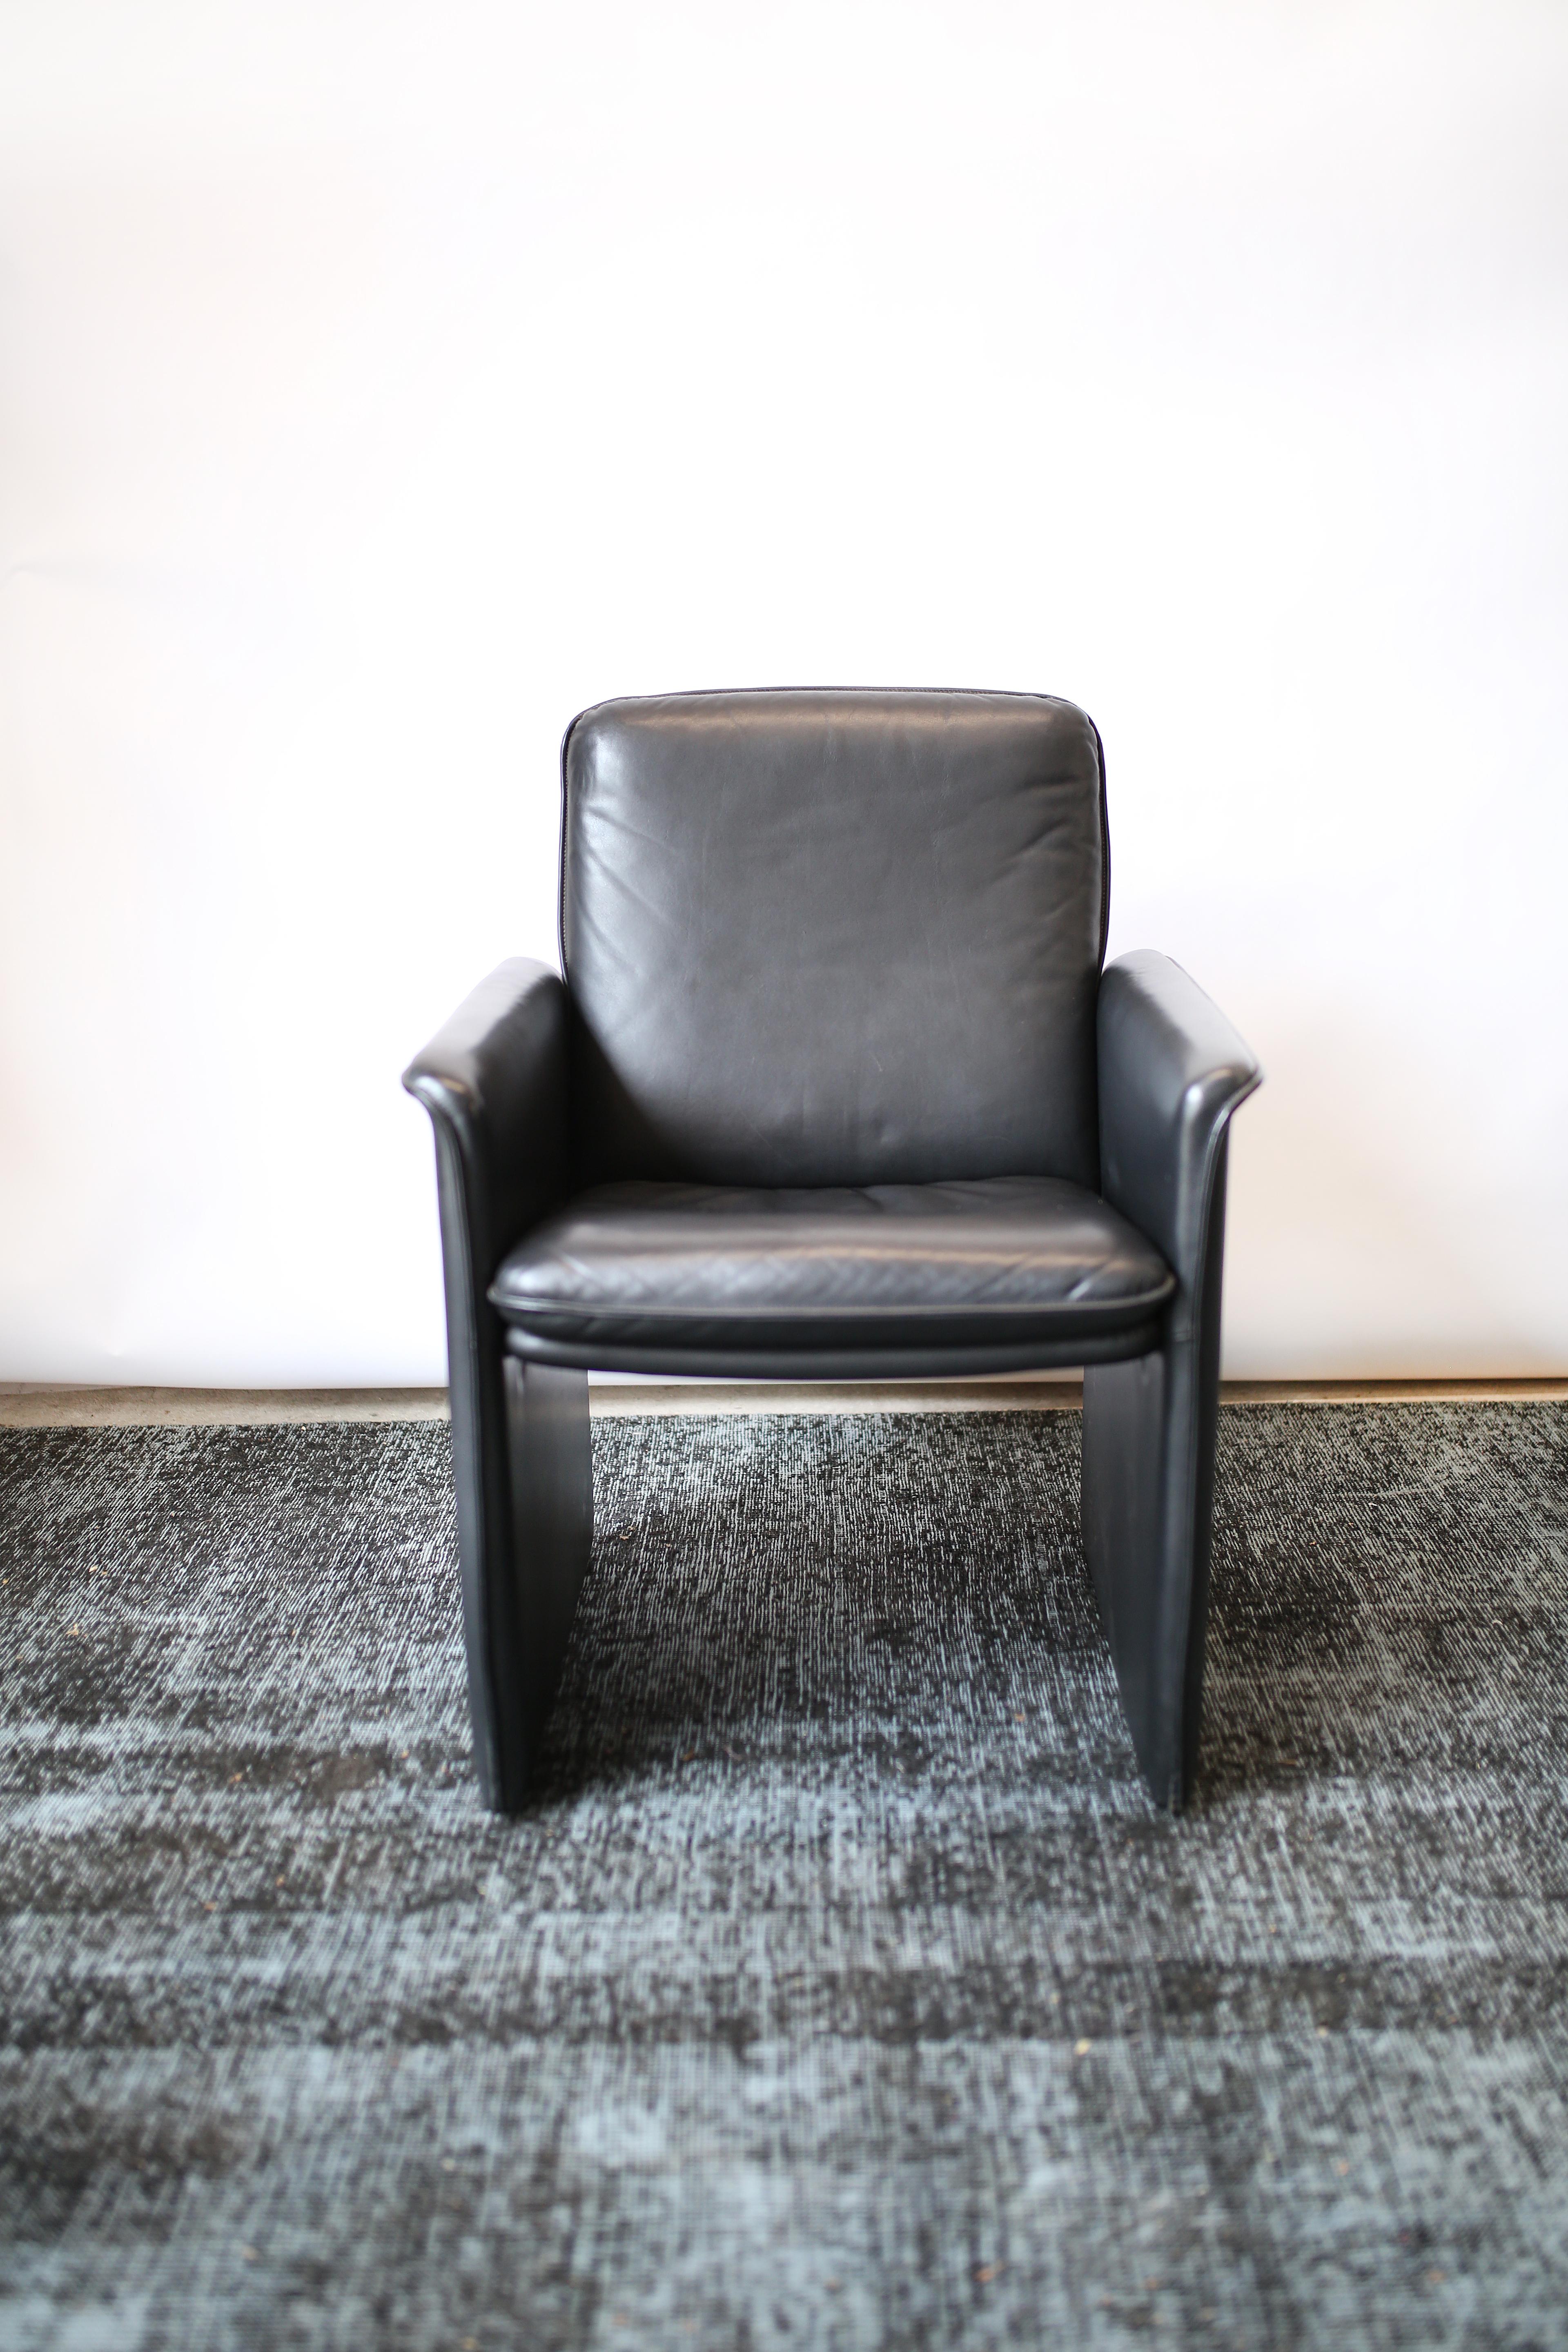 This set of four mid-century modern solid black leather chairs by Swiss company De Sede are in overall very good condition and wear consistent with age and use. Supple black leather. Scandinavian modern design.  
circa 1970s.